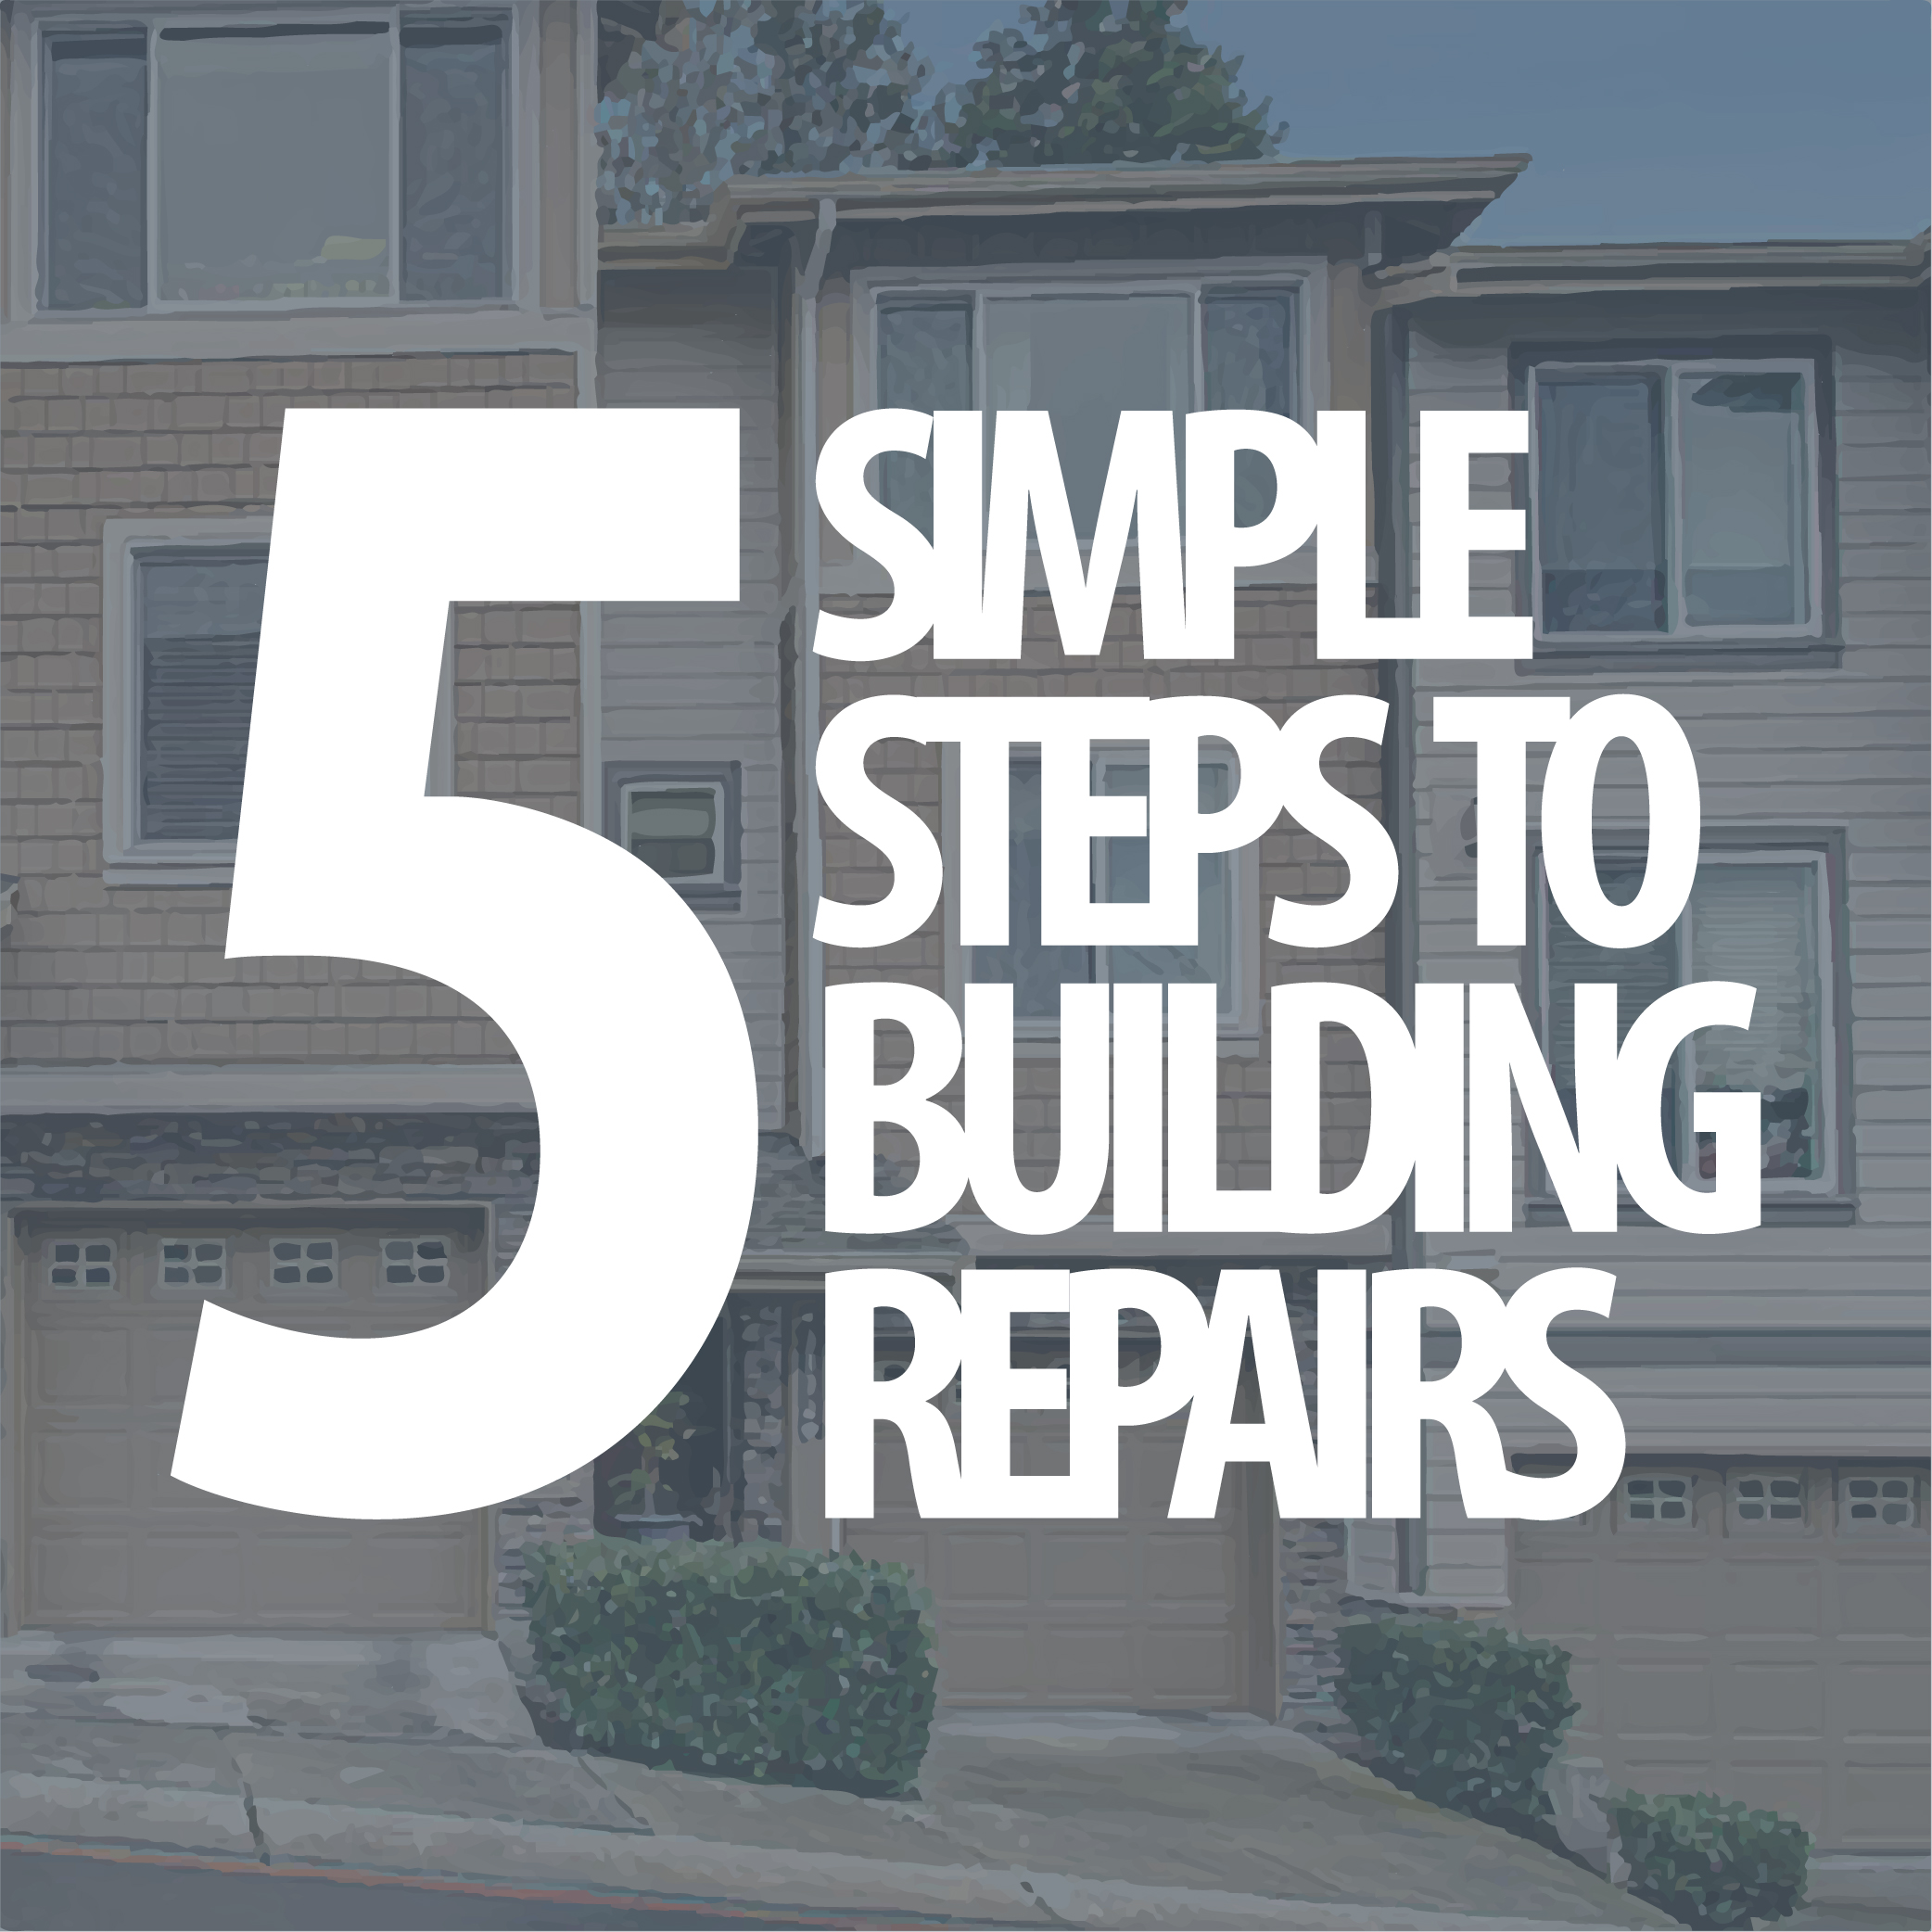 5 Steps to Building Repairs